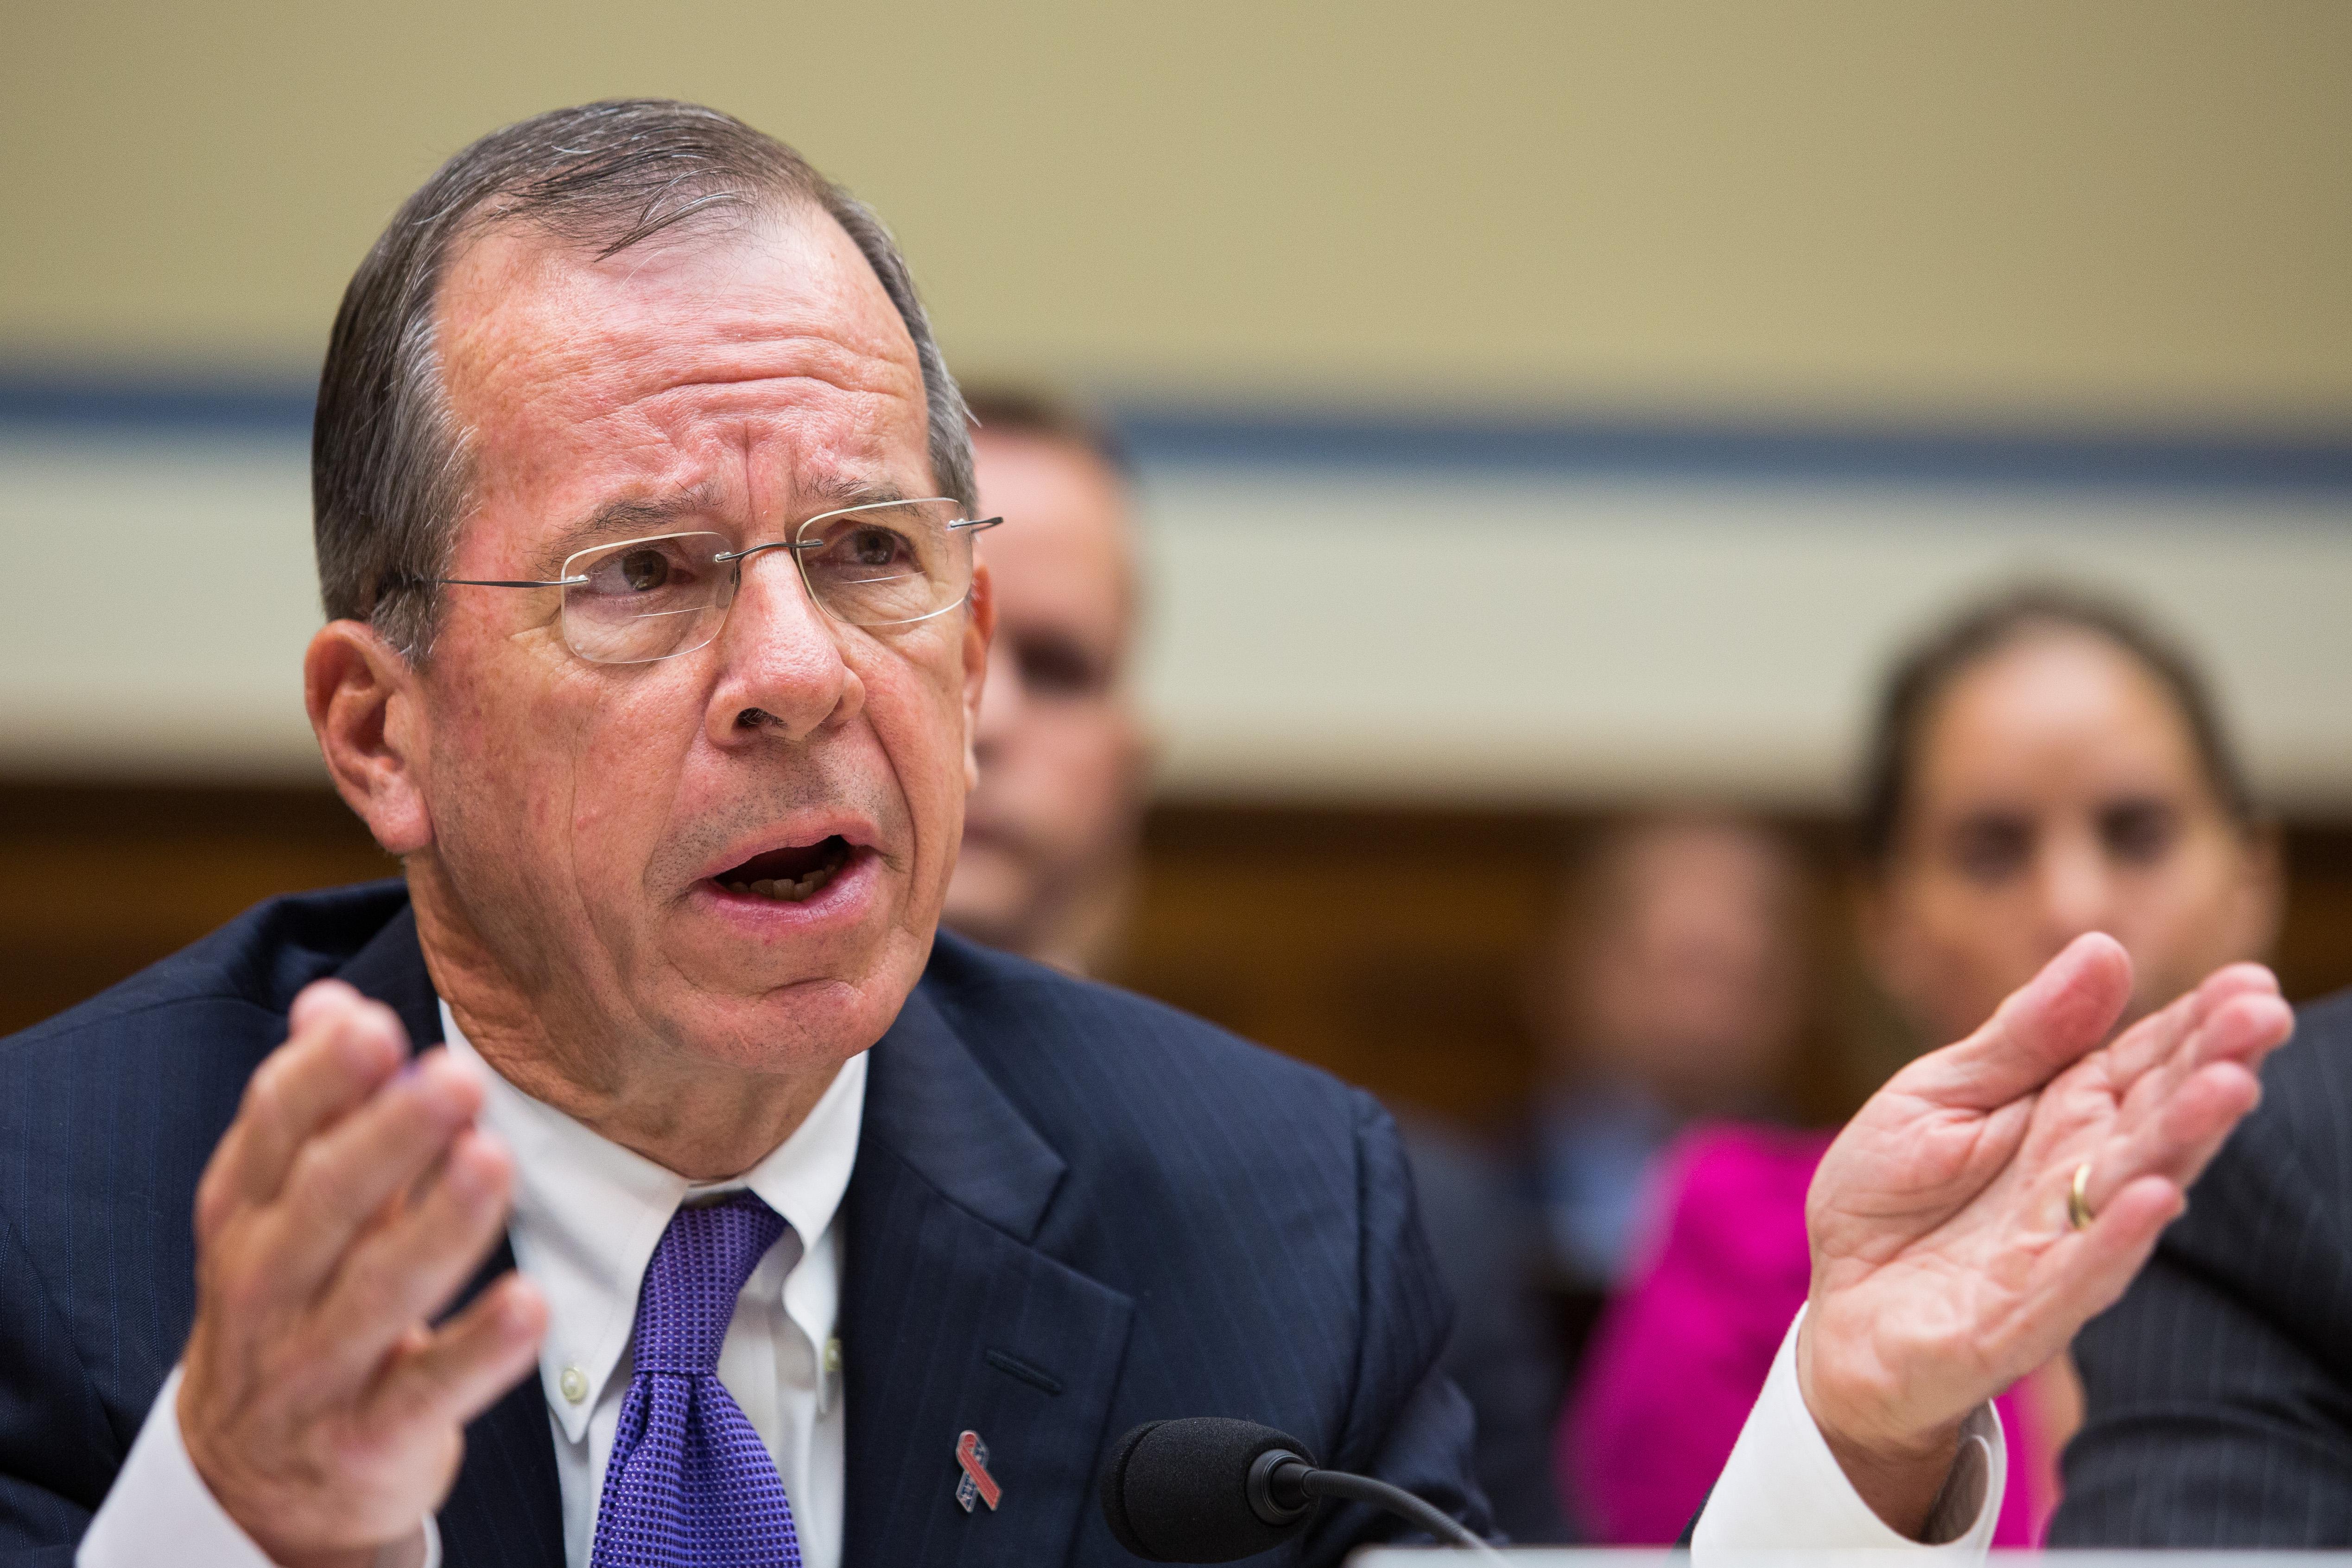 Mike Mullen testifying to Congress in 2013.